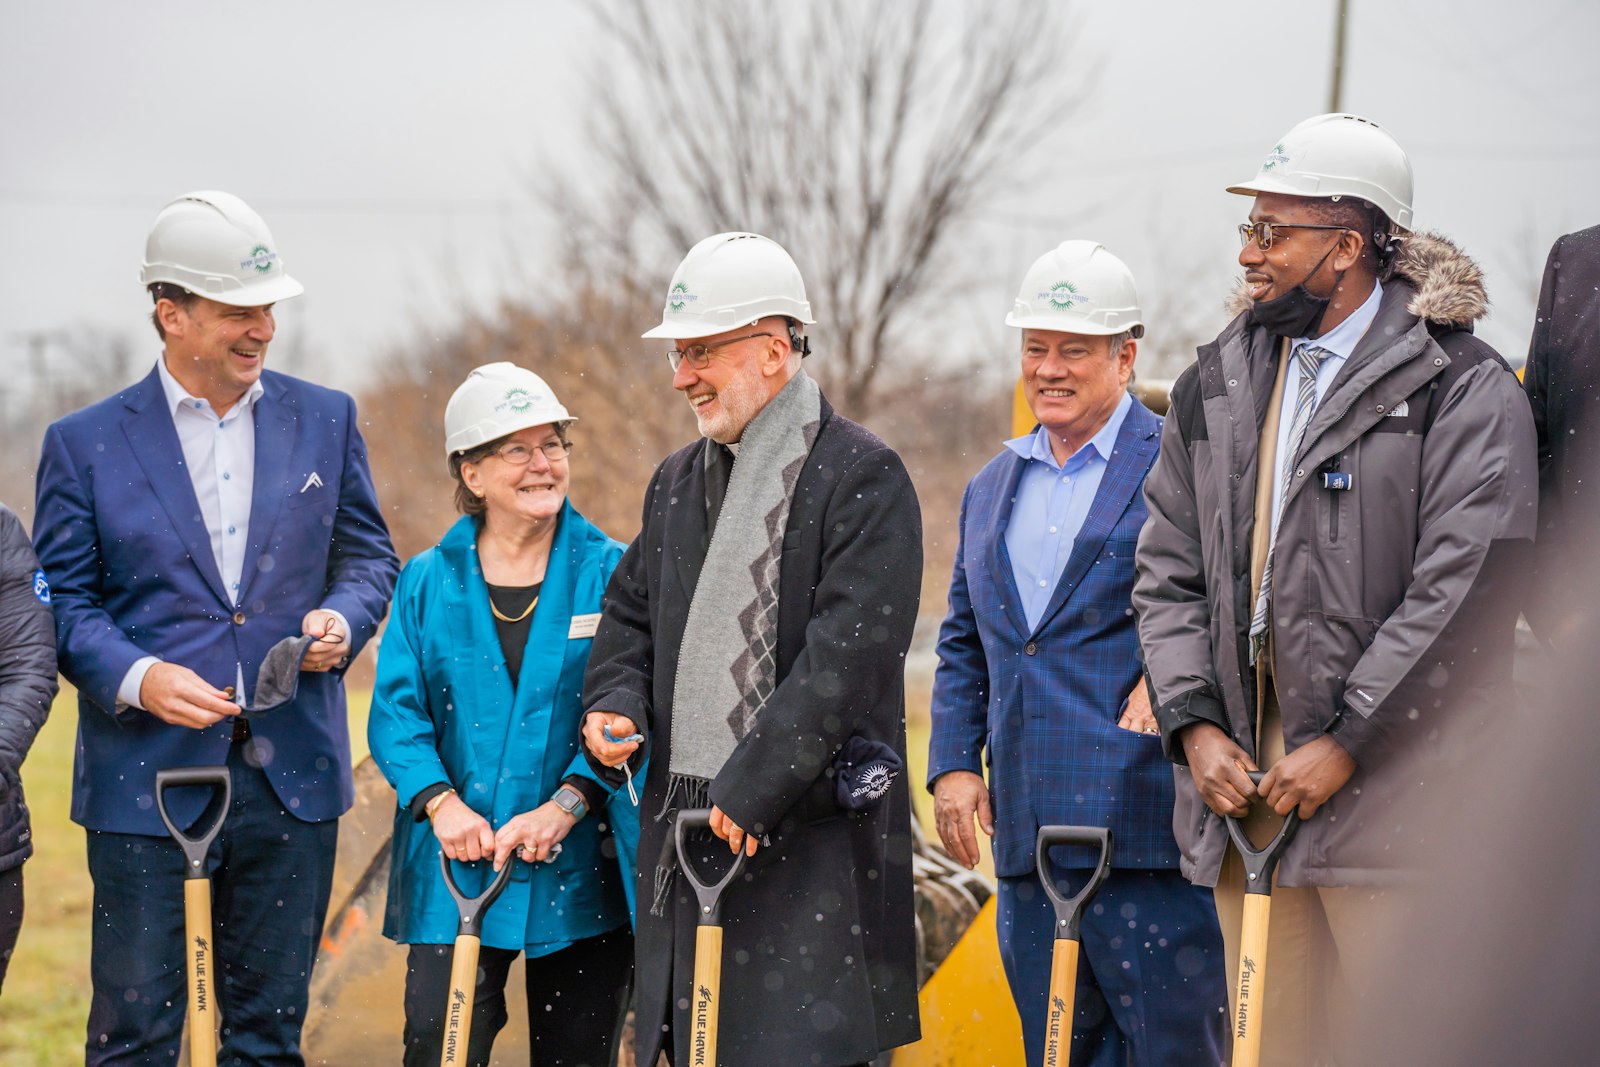 Left to right, Jim Farley, CEO of Ford Motor Company; Robbie Murphy, a board member at the Julie Burke Foundation; Fr. Tim McCabe, SJ, director of the Pope Francis Center; Detroit Mayor Mike Duggan; and Donald Rencher, group executive for the city's Department of Planning, Housing and Development, break ground Dec. 3 at the site of a new bridge housing facility for the Pope Francis Center on Detroit's west side. (Valaurian Waller | Detroit Catholic)